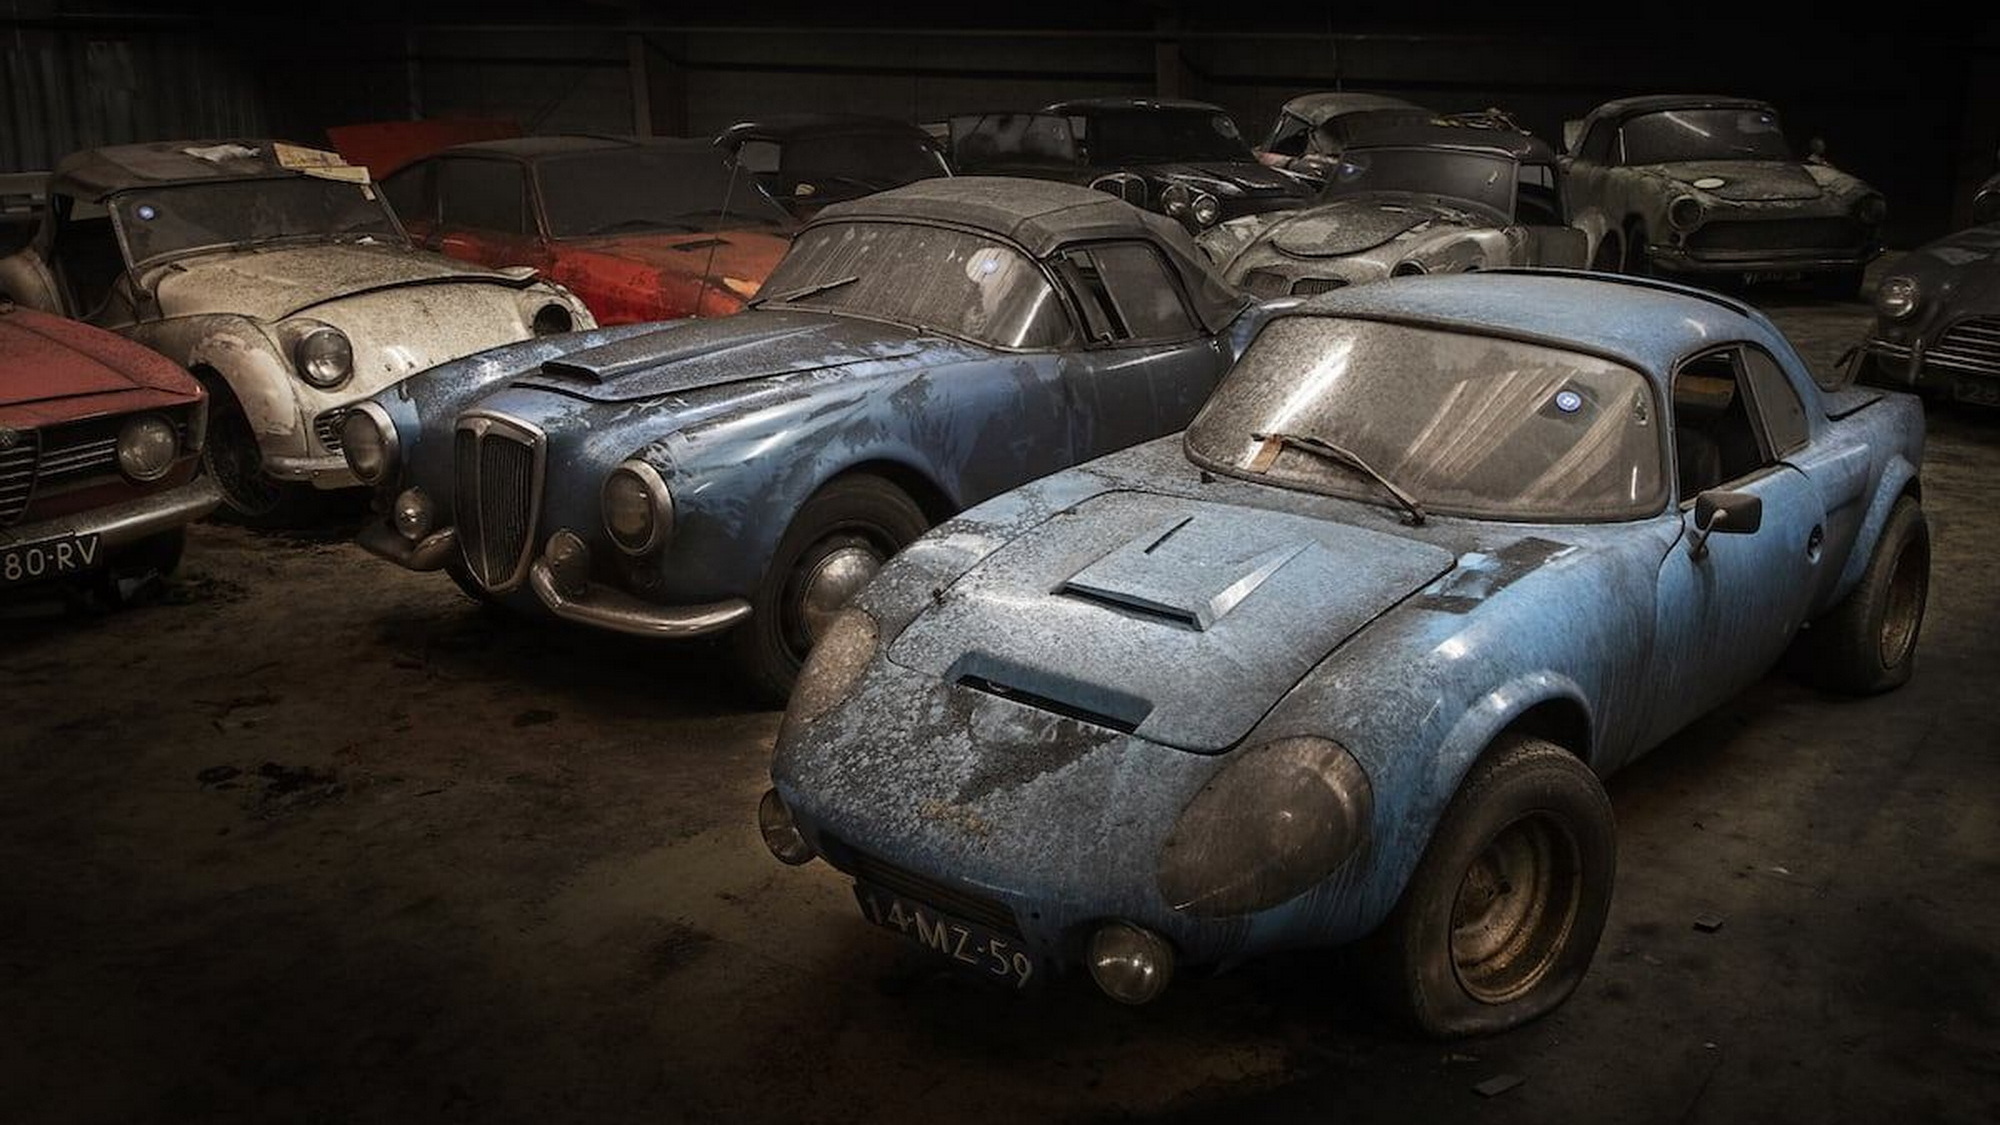 Beautiful Pictures of Priceless Classic Cars Found Abandoned in